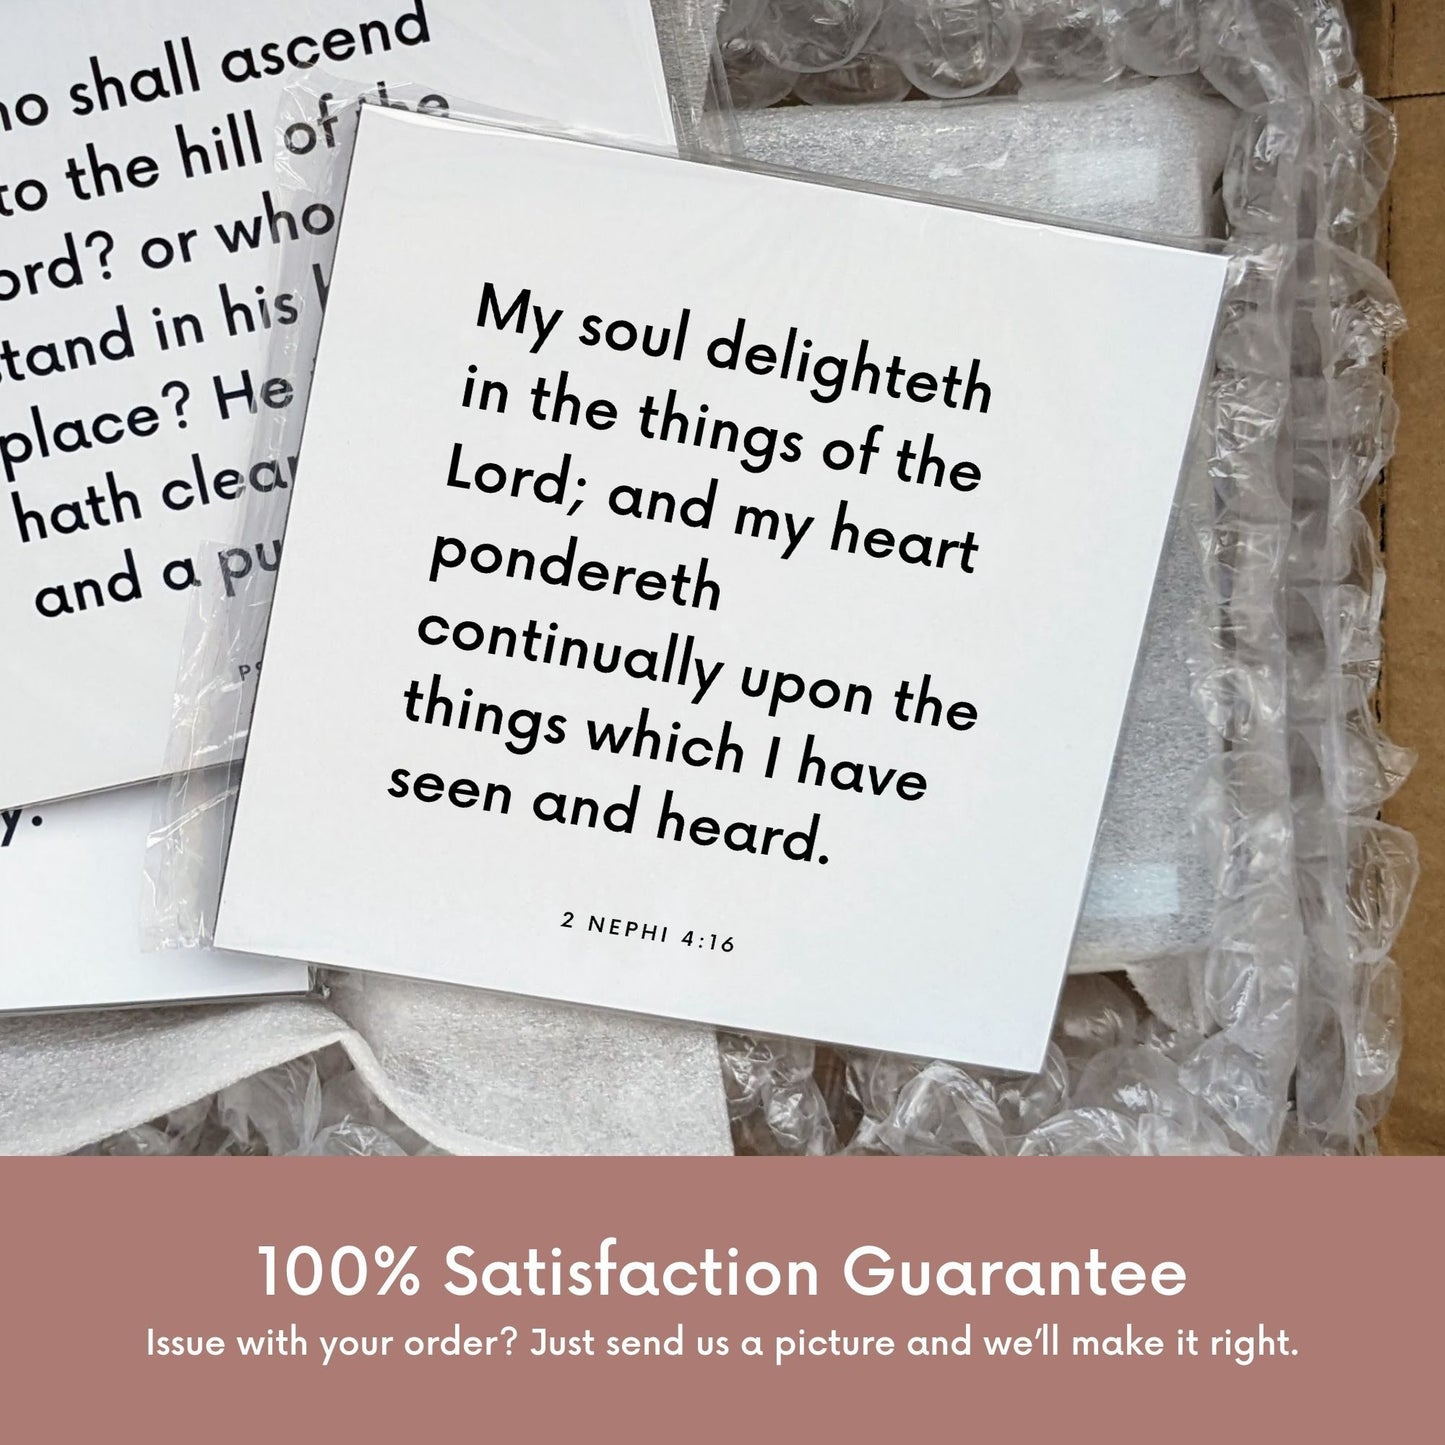 Shipping materials for scripture tile of 2 Nephi 4:16 - "My soul delighteth in the things of the Lord"